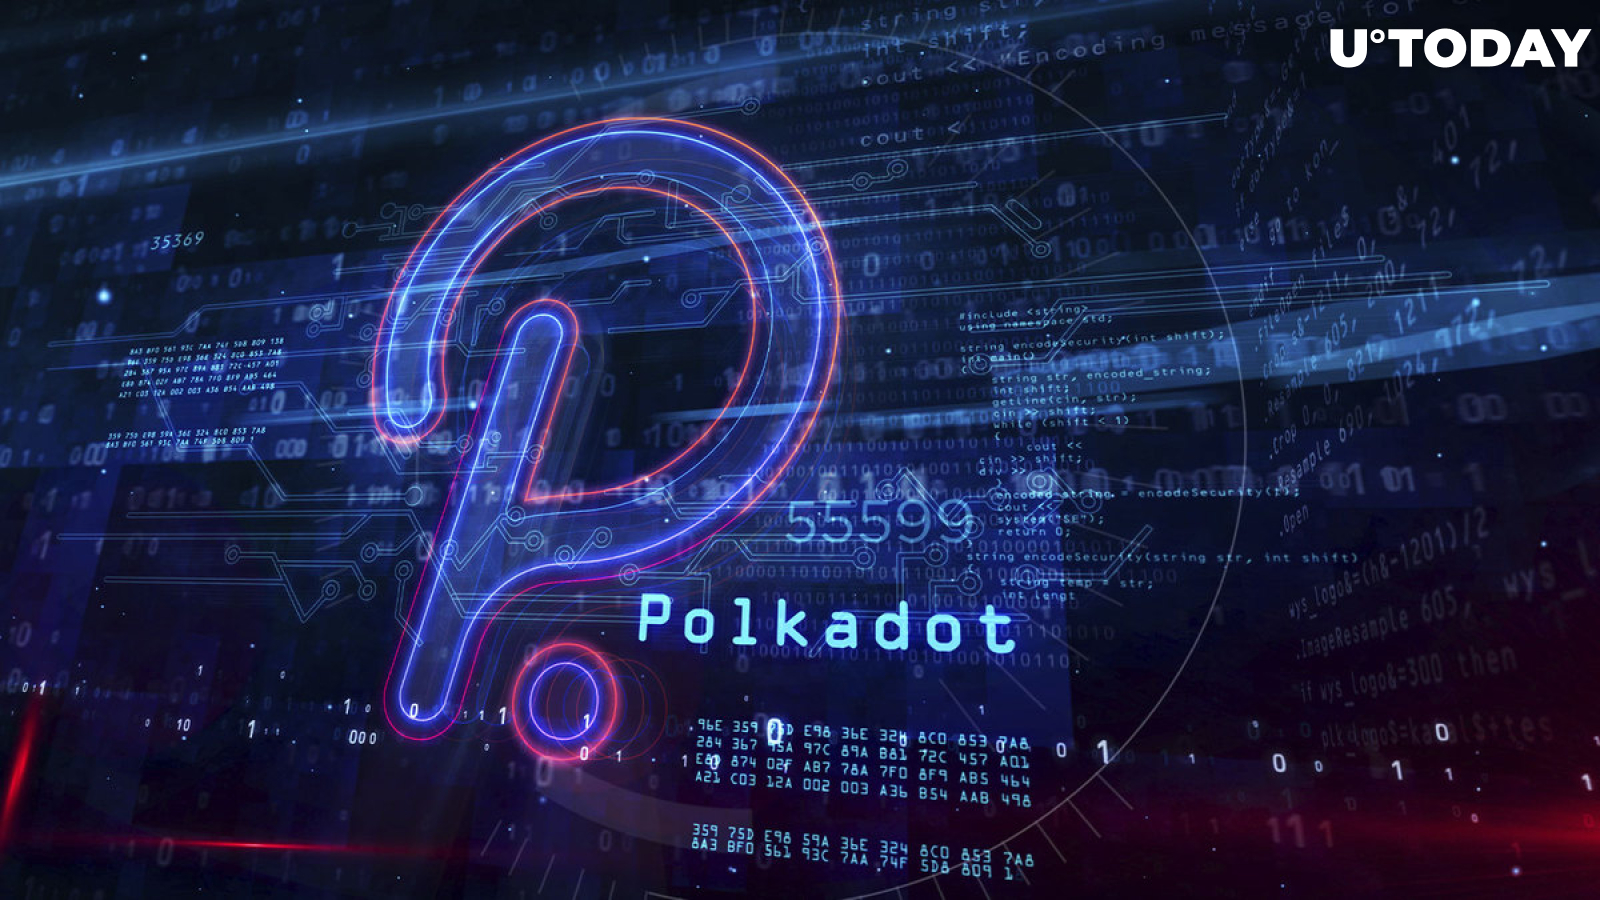 Polkadot (DOT) Seeks Additional Functionalities With 3 Key Upcoming Upgrades: Details